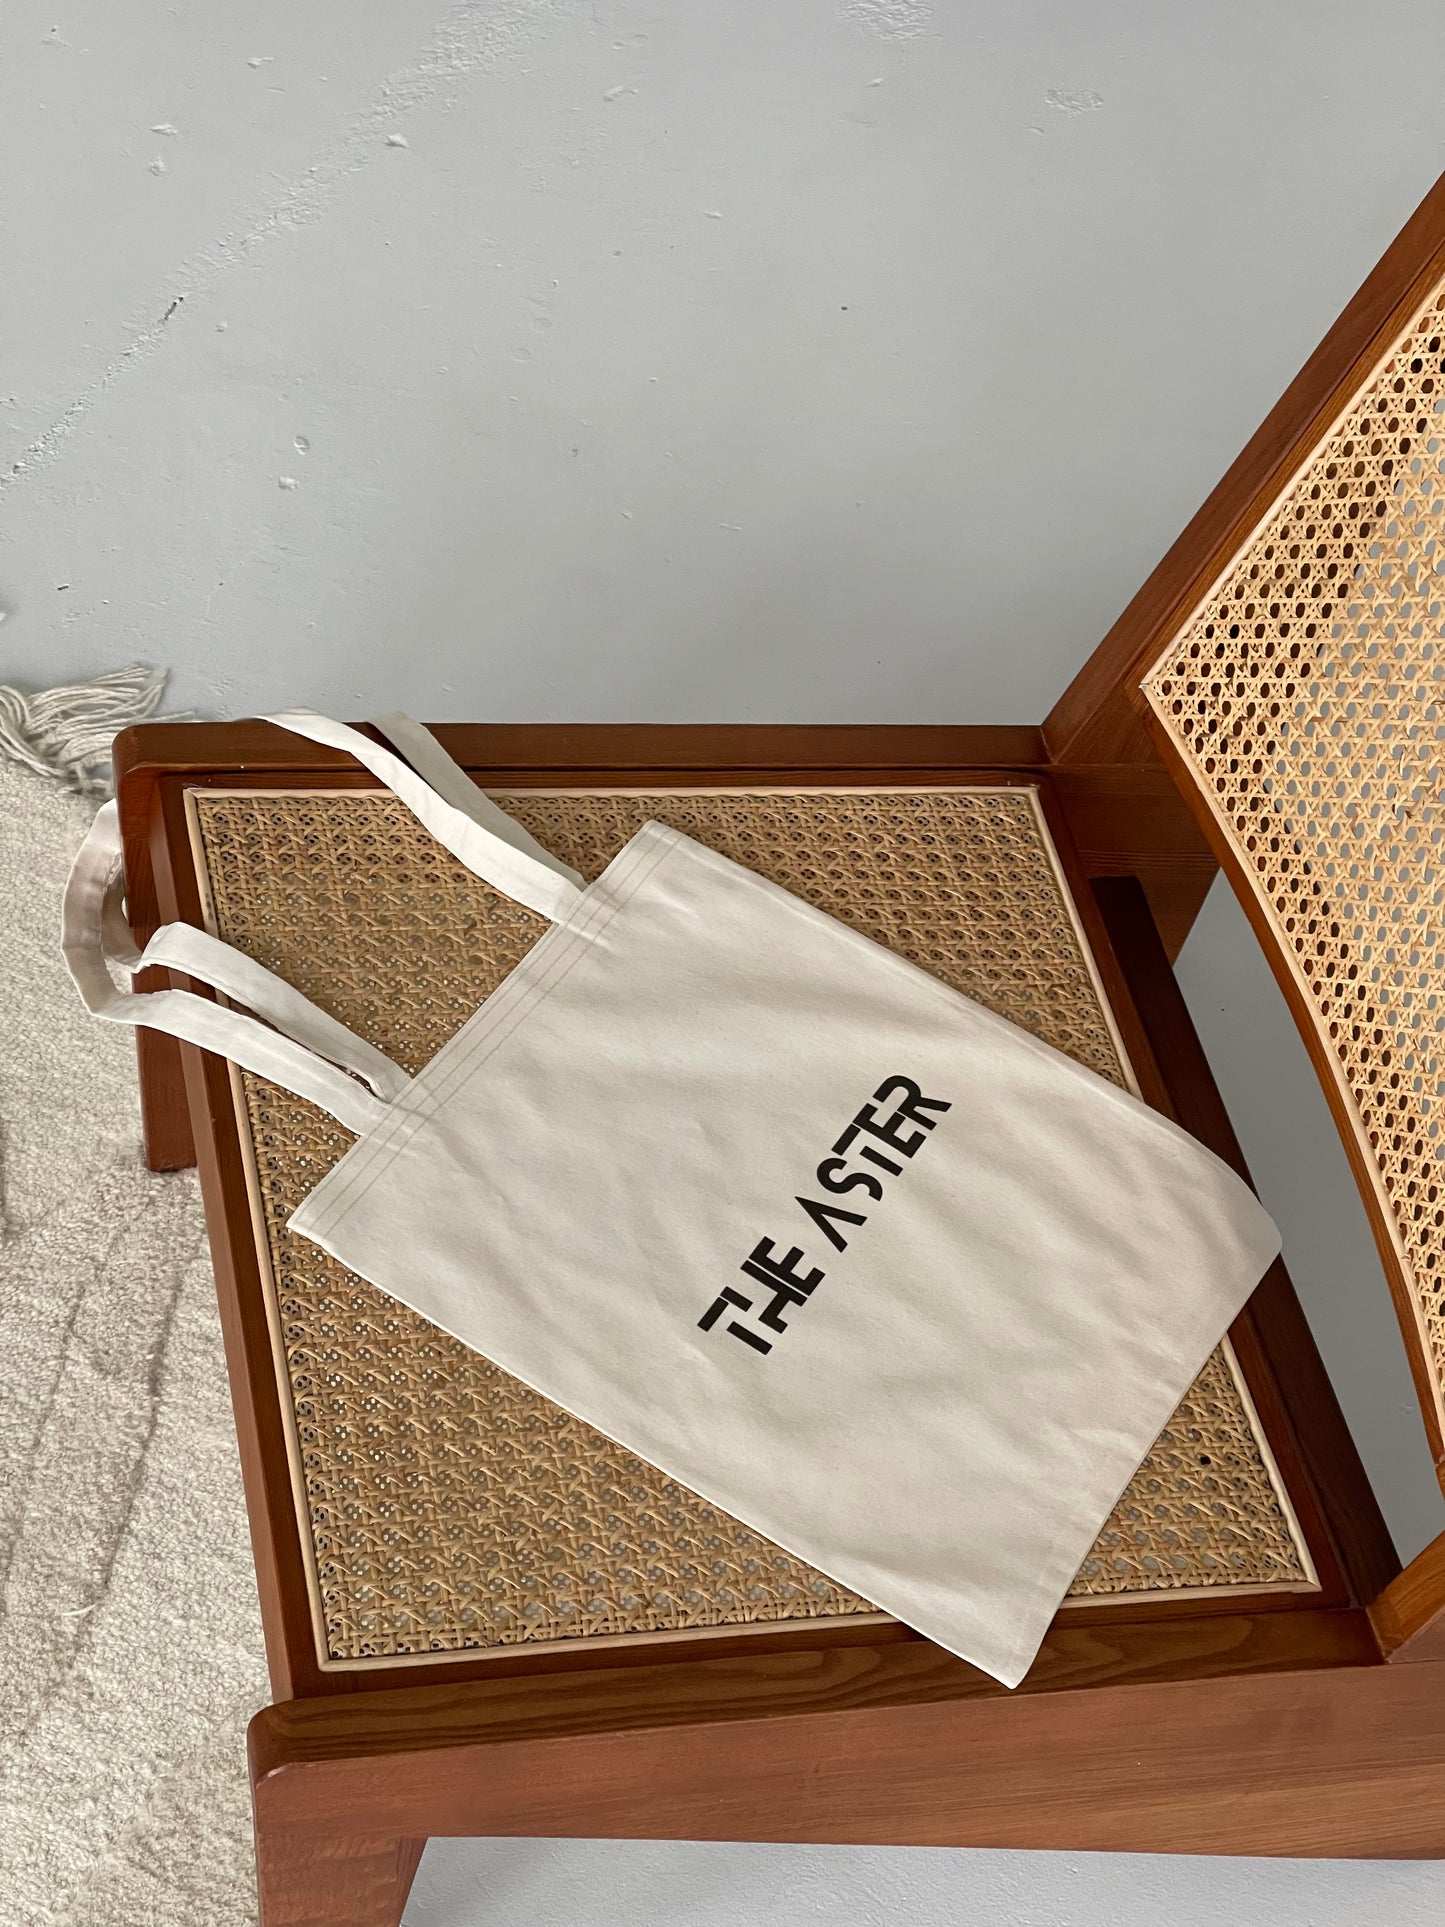 Tote bag "We could all be better humans"